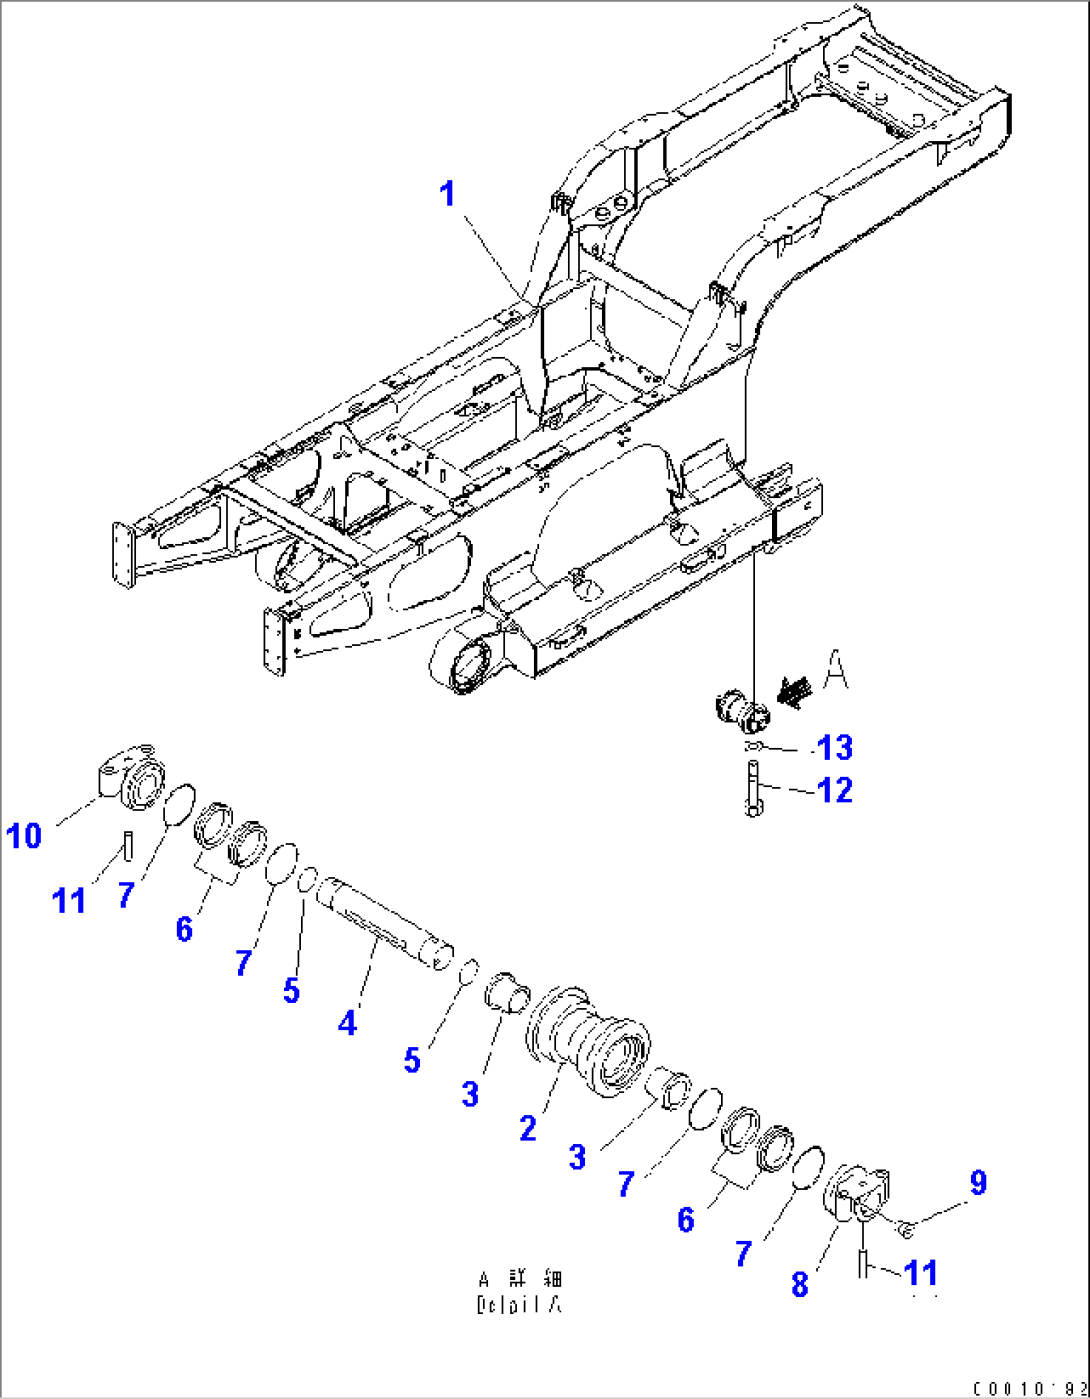 TRACK FRAME (FRAME AND TRACK ROLLER) (WITH WATER SPLAY)(#1001-1200)